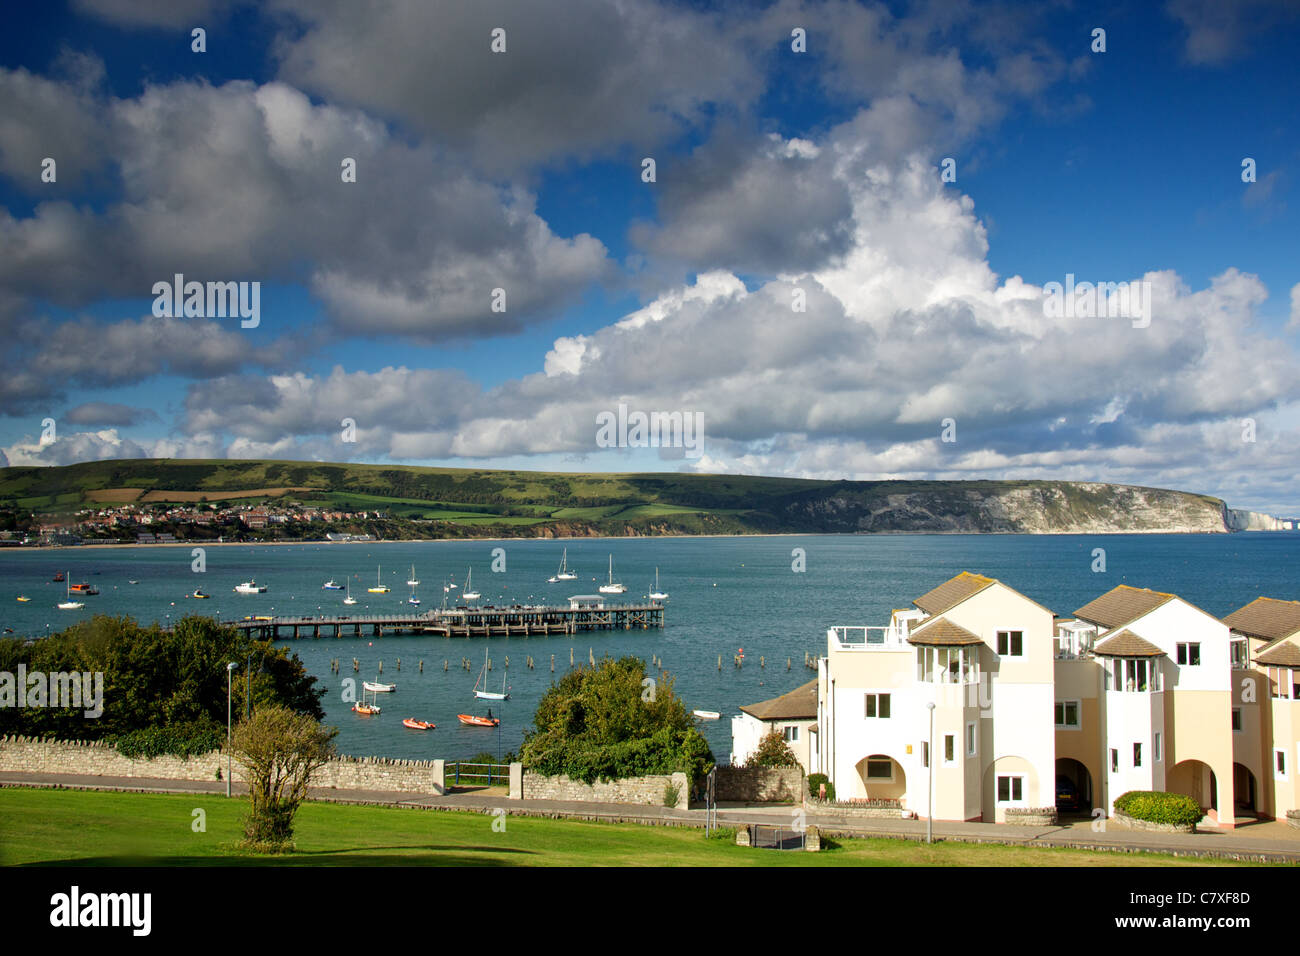 Swanage Bay from Peveril Point Road, Swanage, Dorset, UK Stock Photo